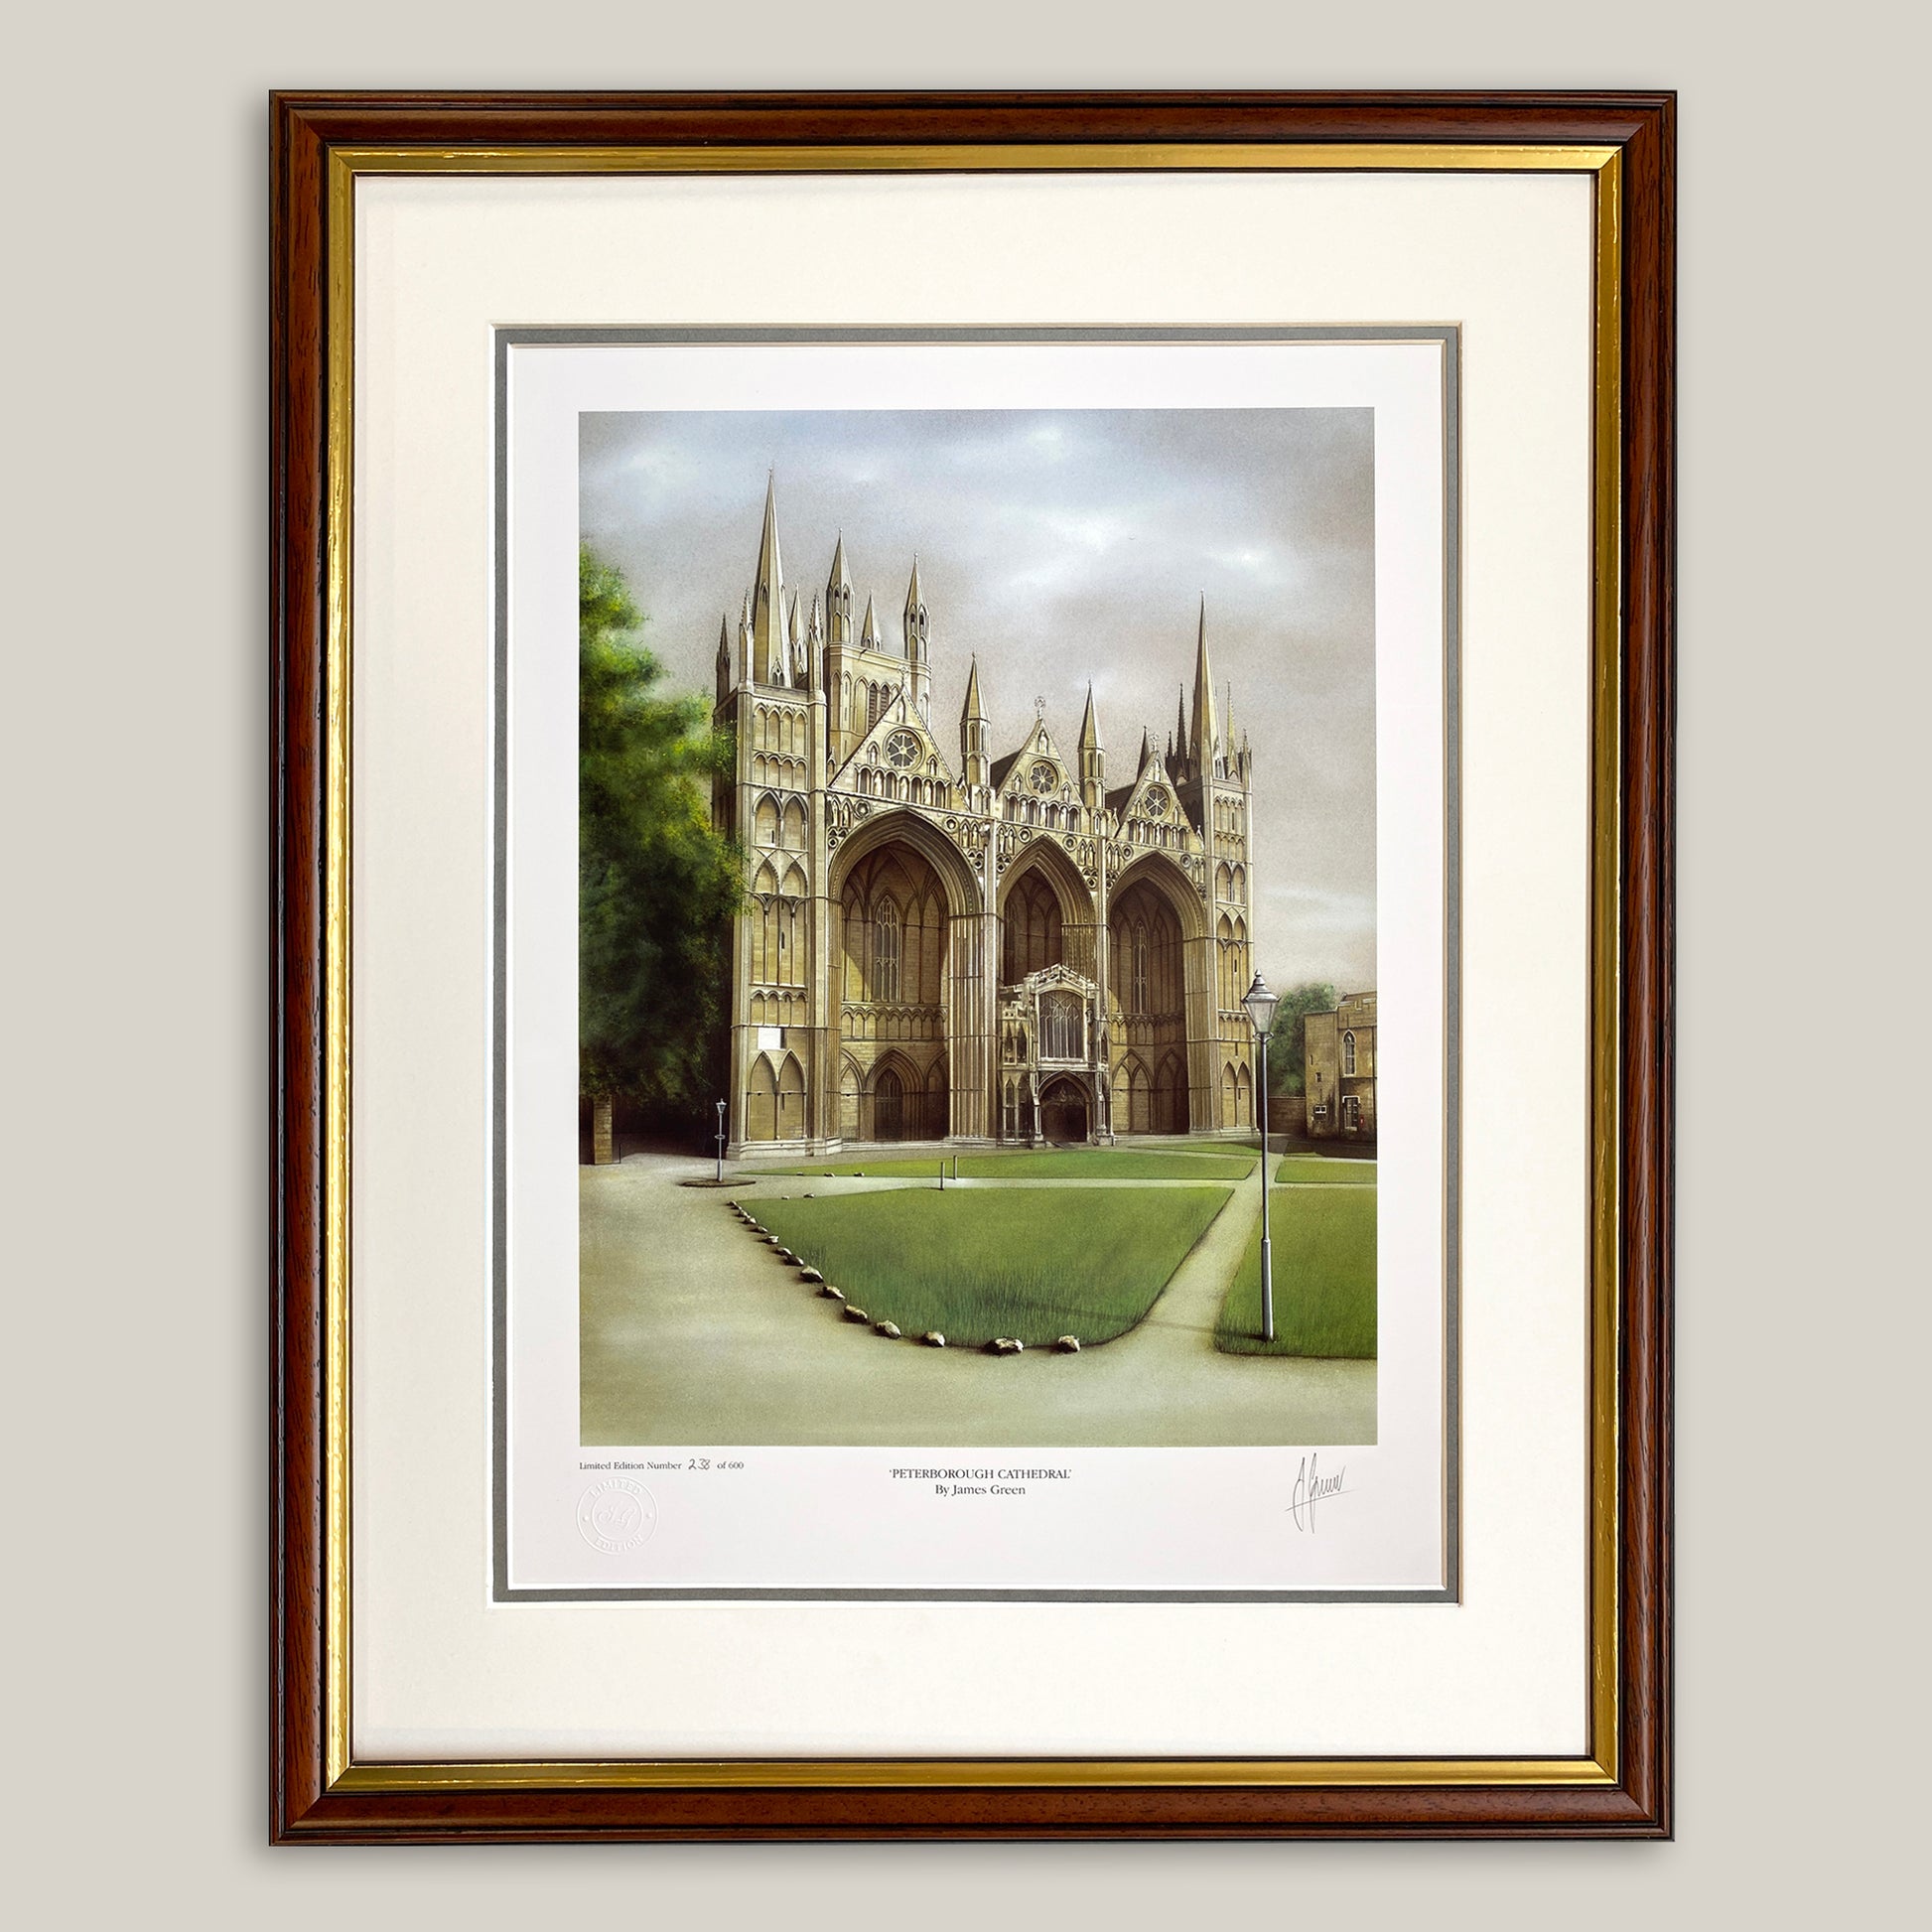 framed painting of Peterborough cathedrals west front by local artist James Green